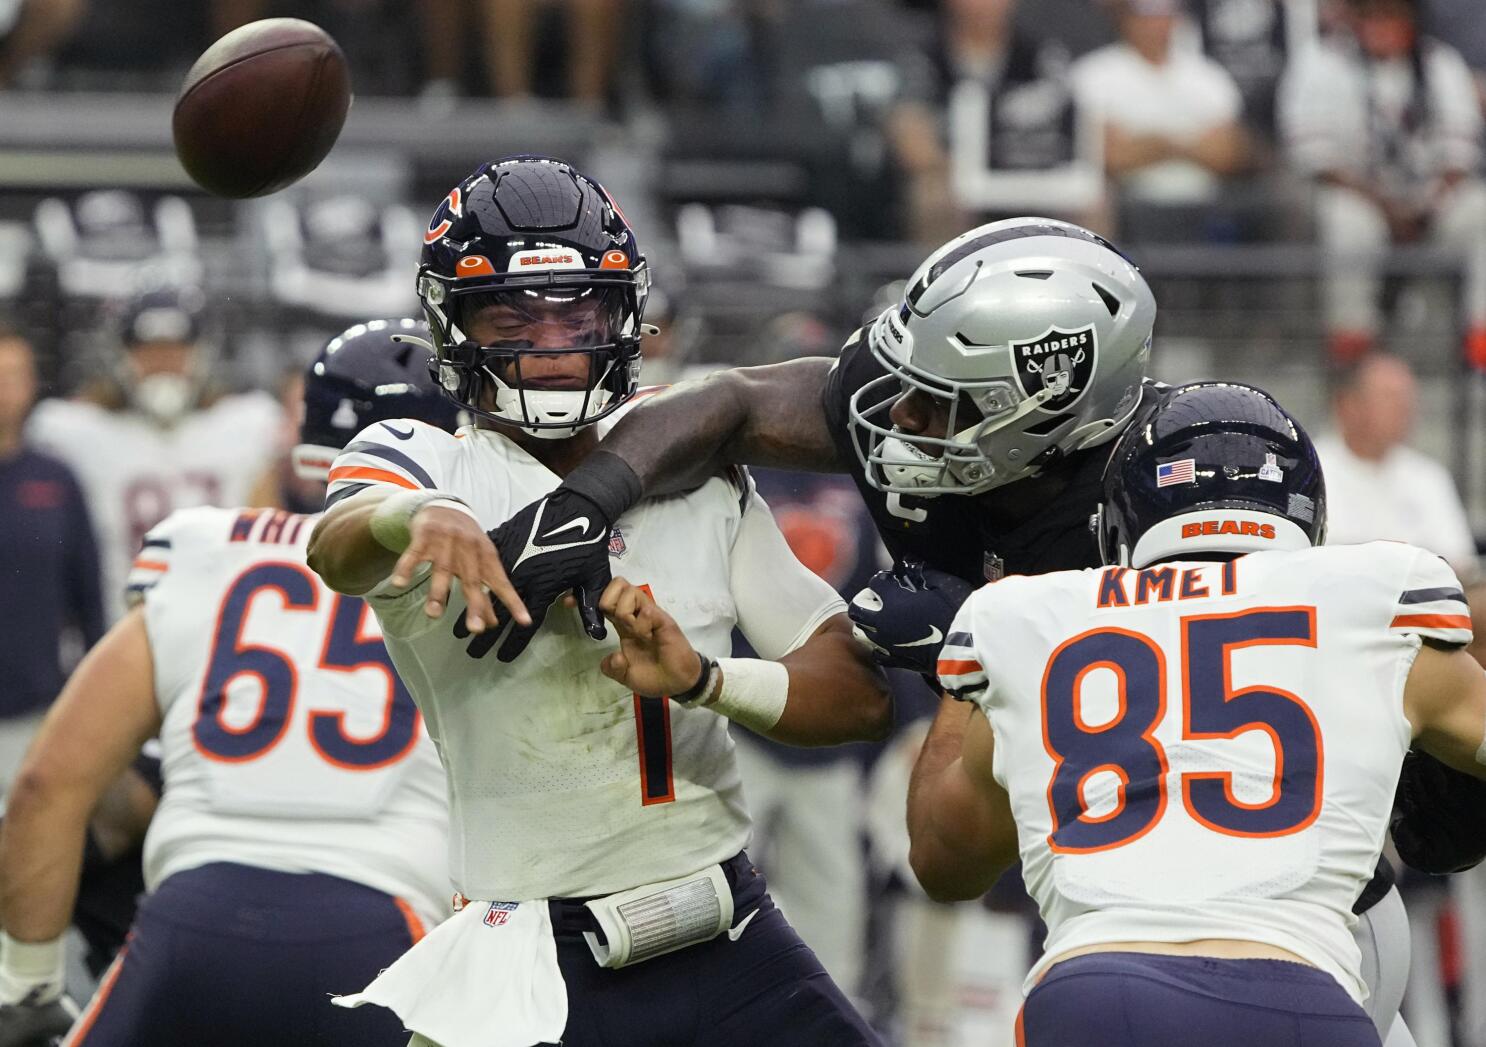 Bears wrap up dismal week with disappointing performance in 41-10 loss in KC